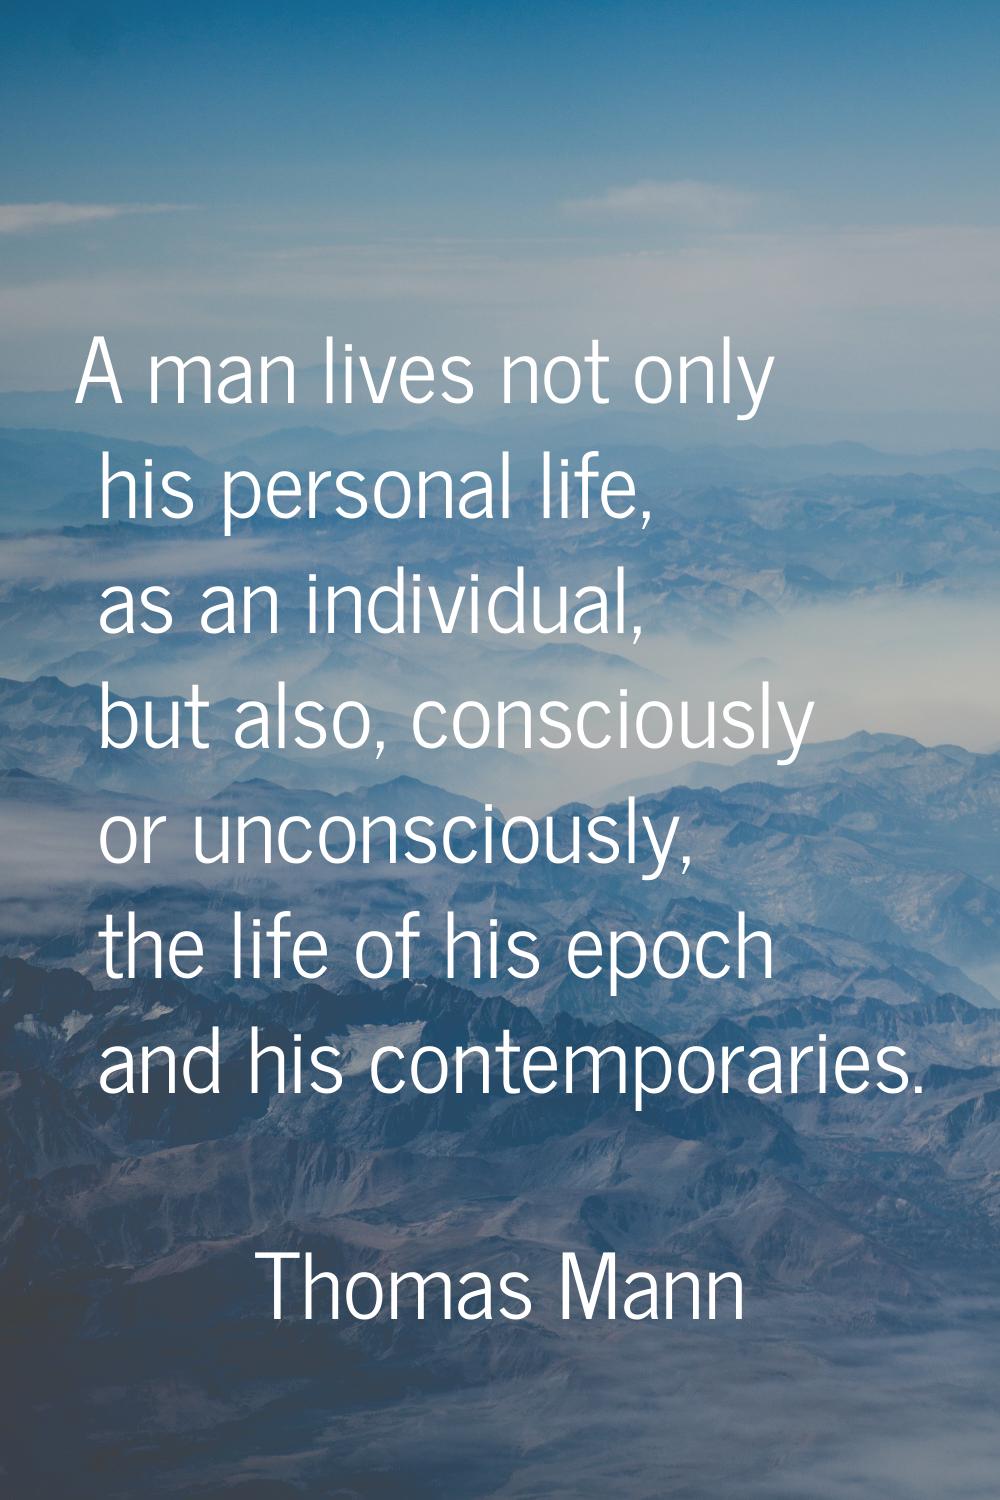 A man lives not only his personal life, as an individual, but also, consciously or unconsciously, t